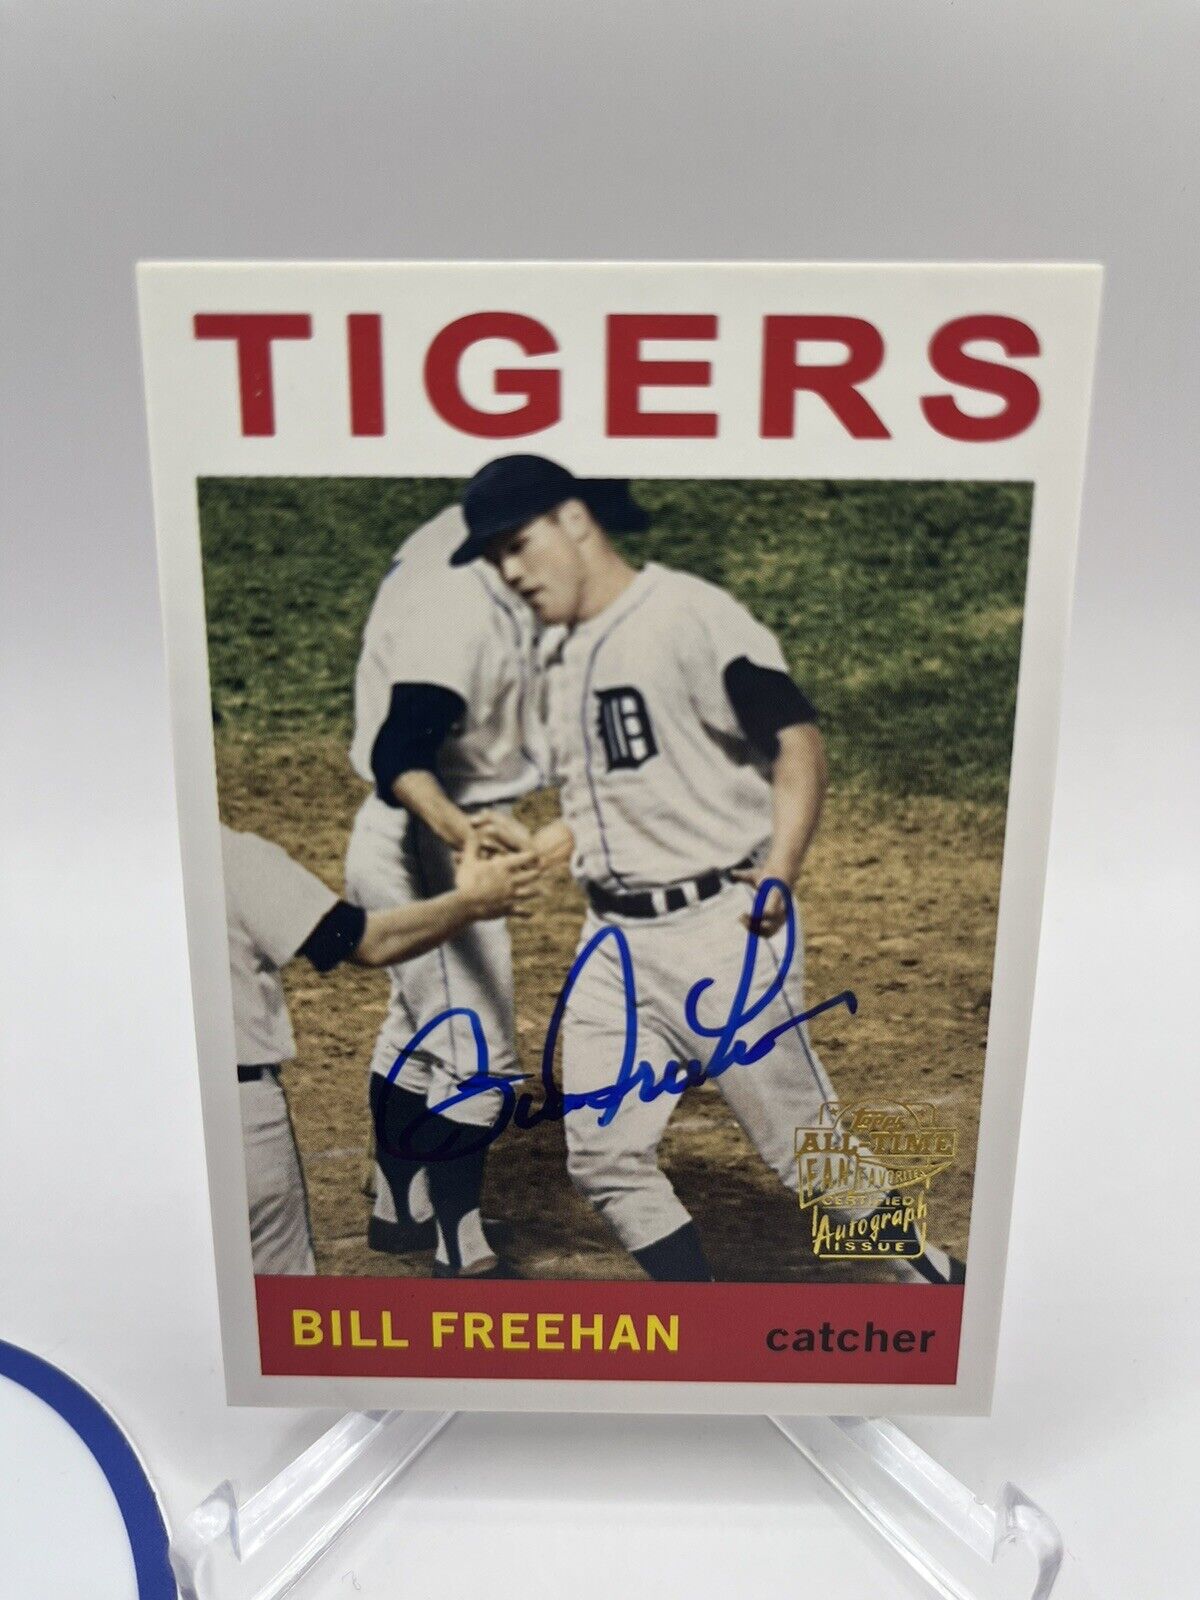 2005 Topps All-Time Fan Favorites Bill Freehan FFA-BF Autograph Card Tigers